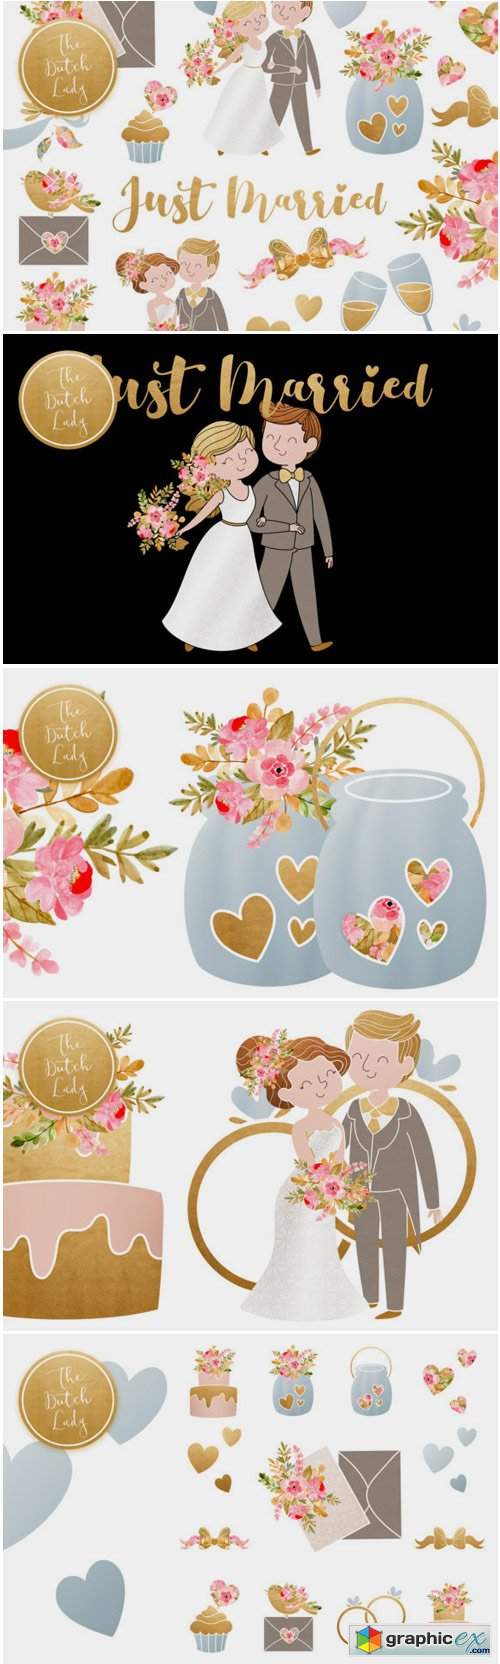 Wedding Day & Marriage Clipart Set